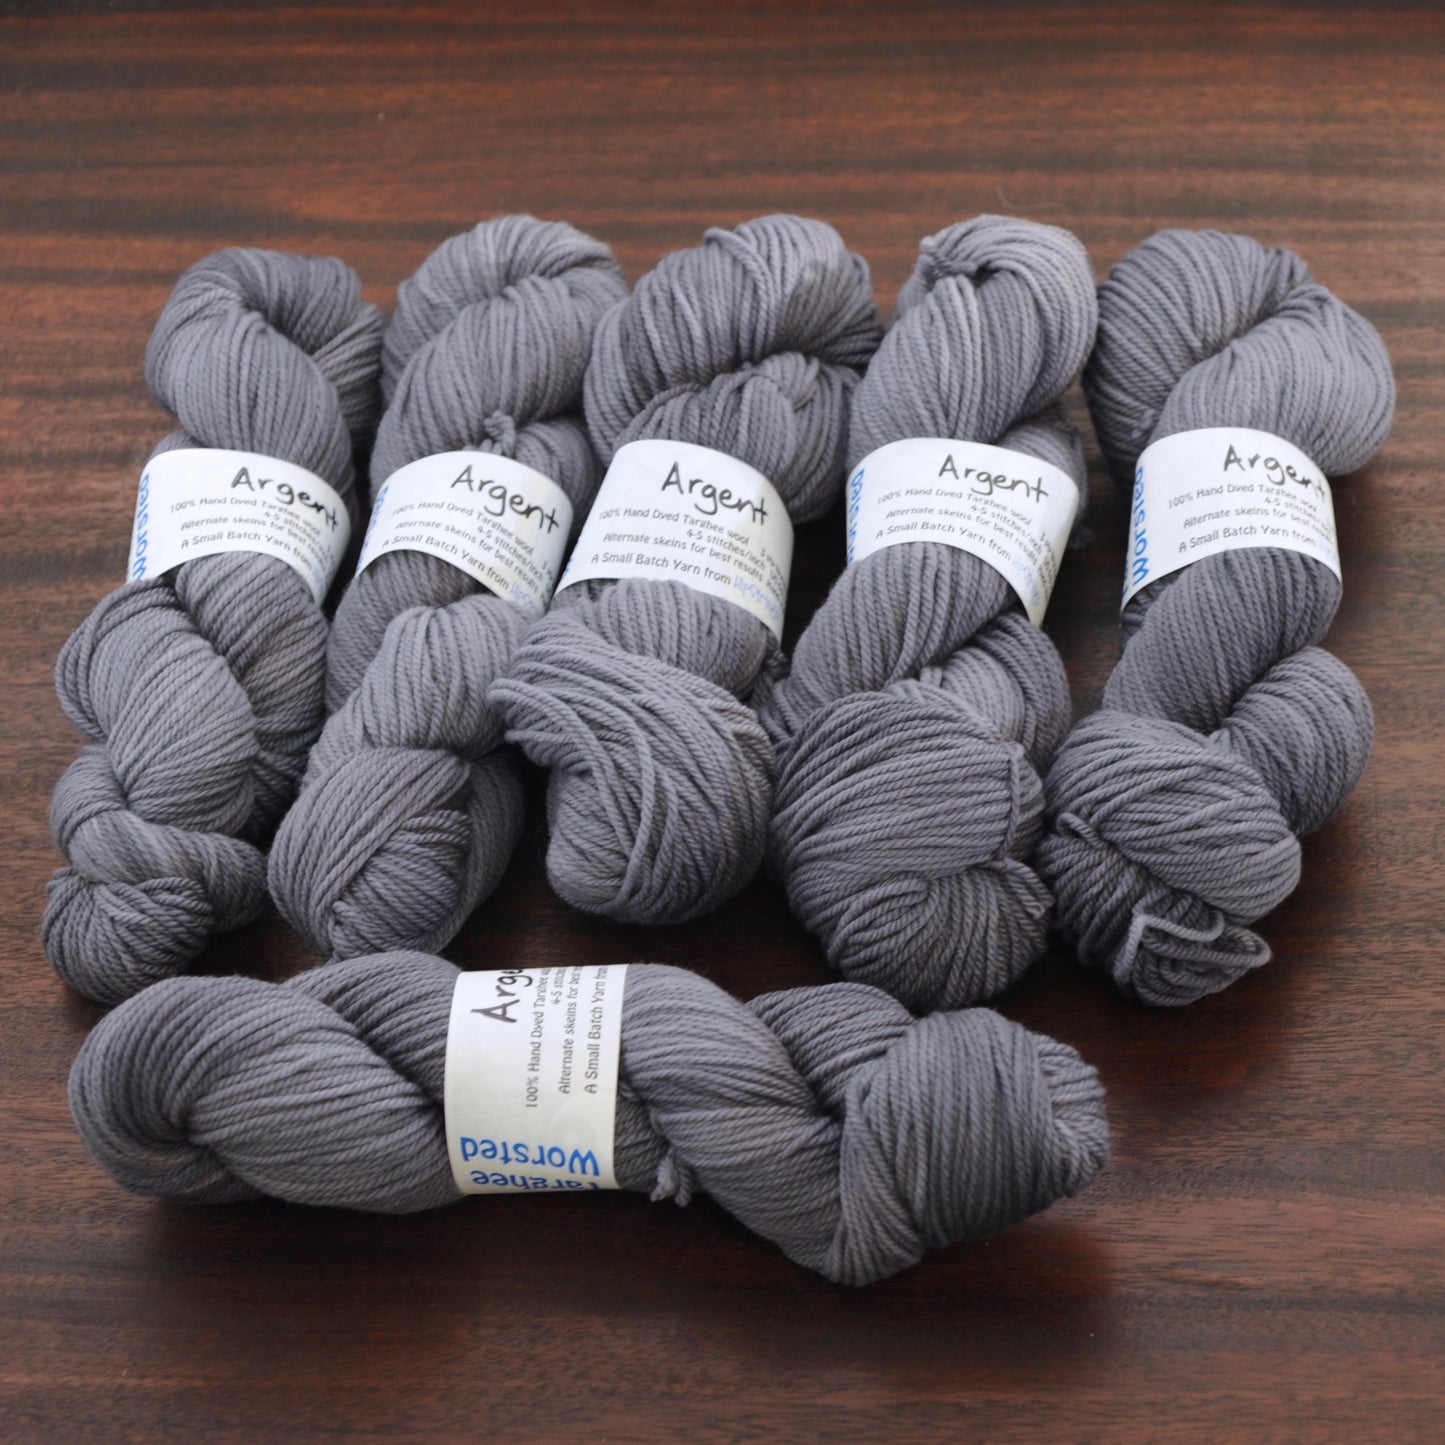 Argent on Hand Dyed Targhee Wool Worsted Yarn - 230 yd/100g